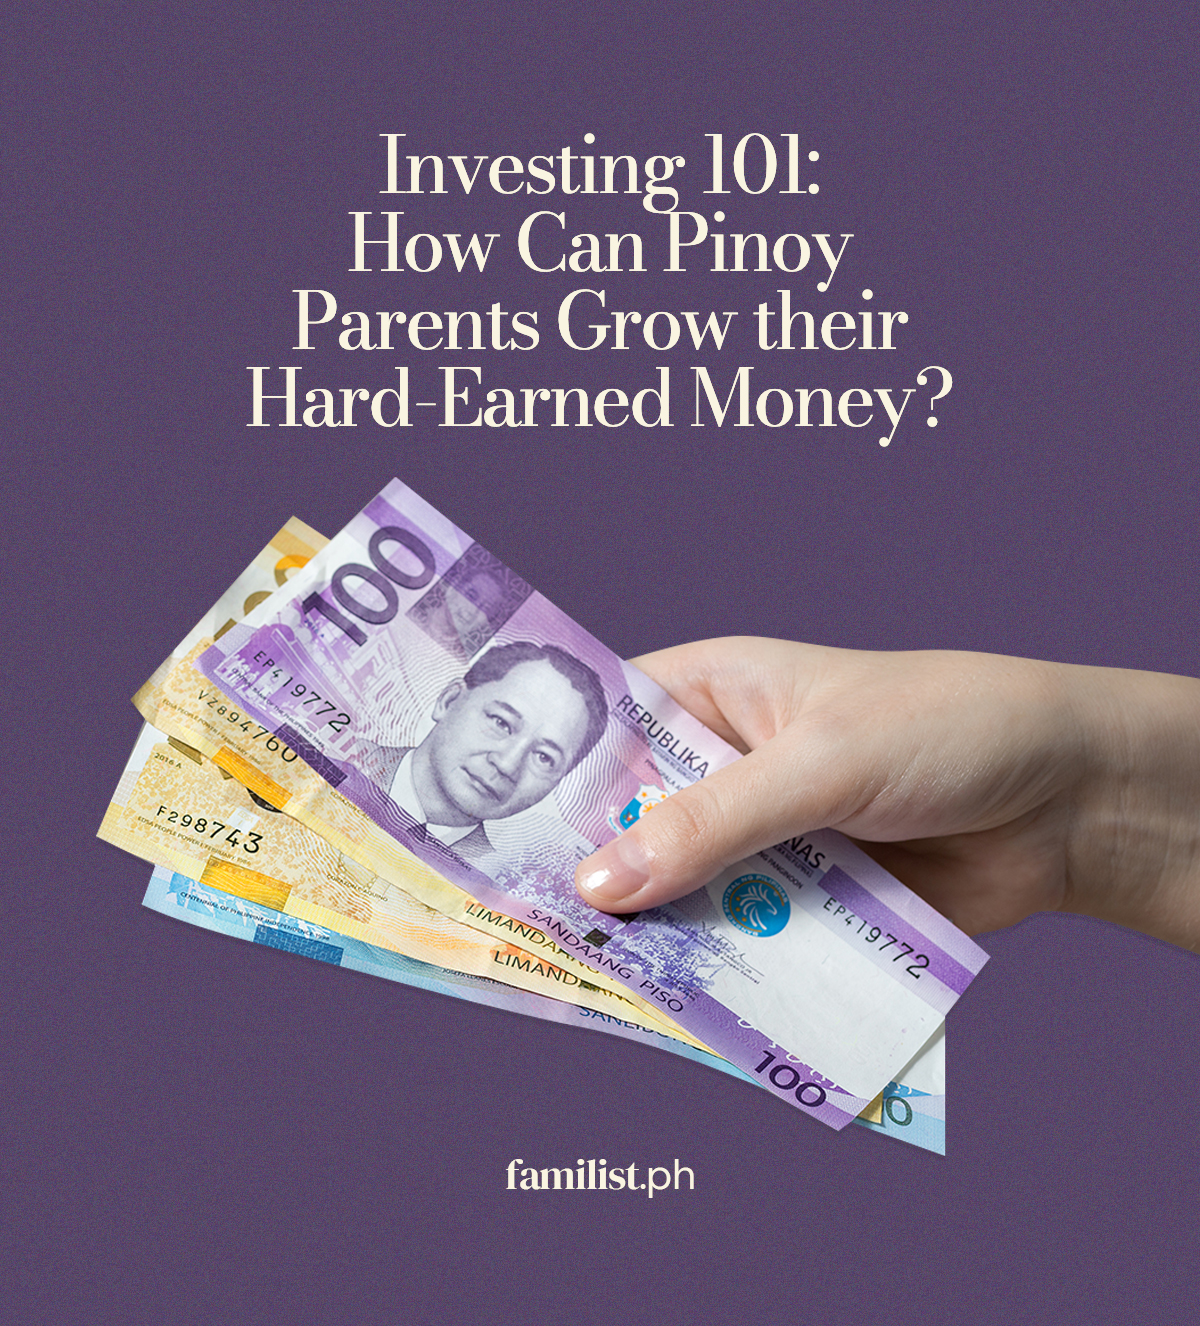 Investing 101: How Can Pinoy Parents Grow their Hard-Earned Money?